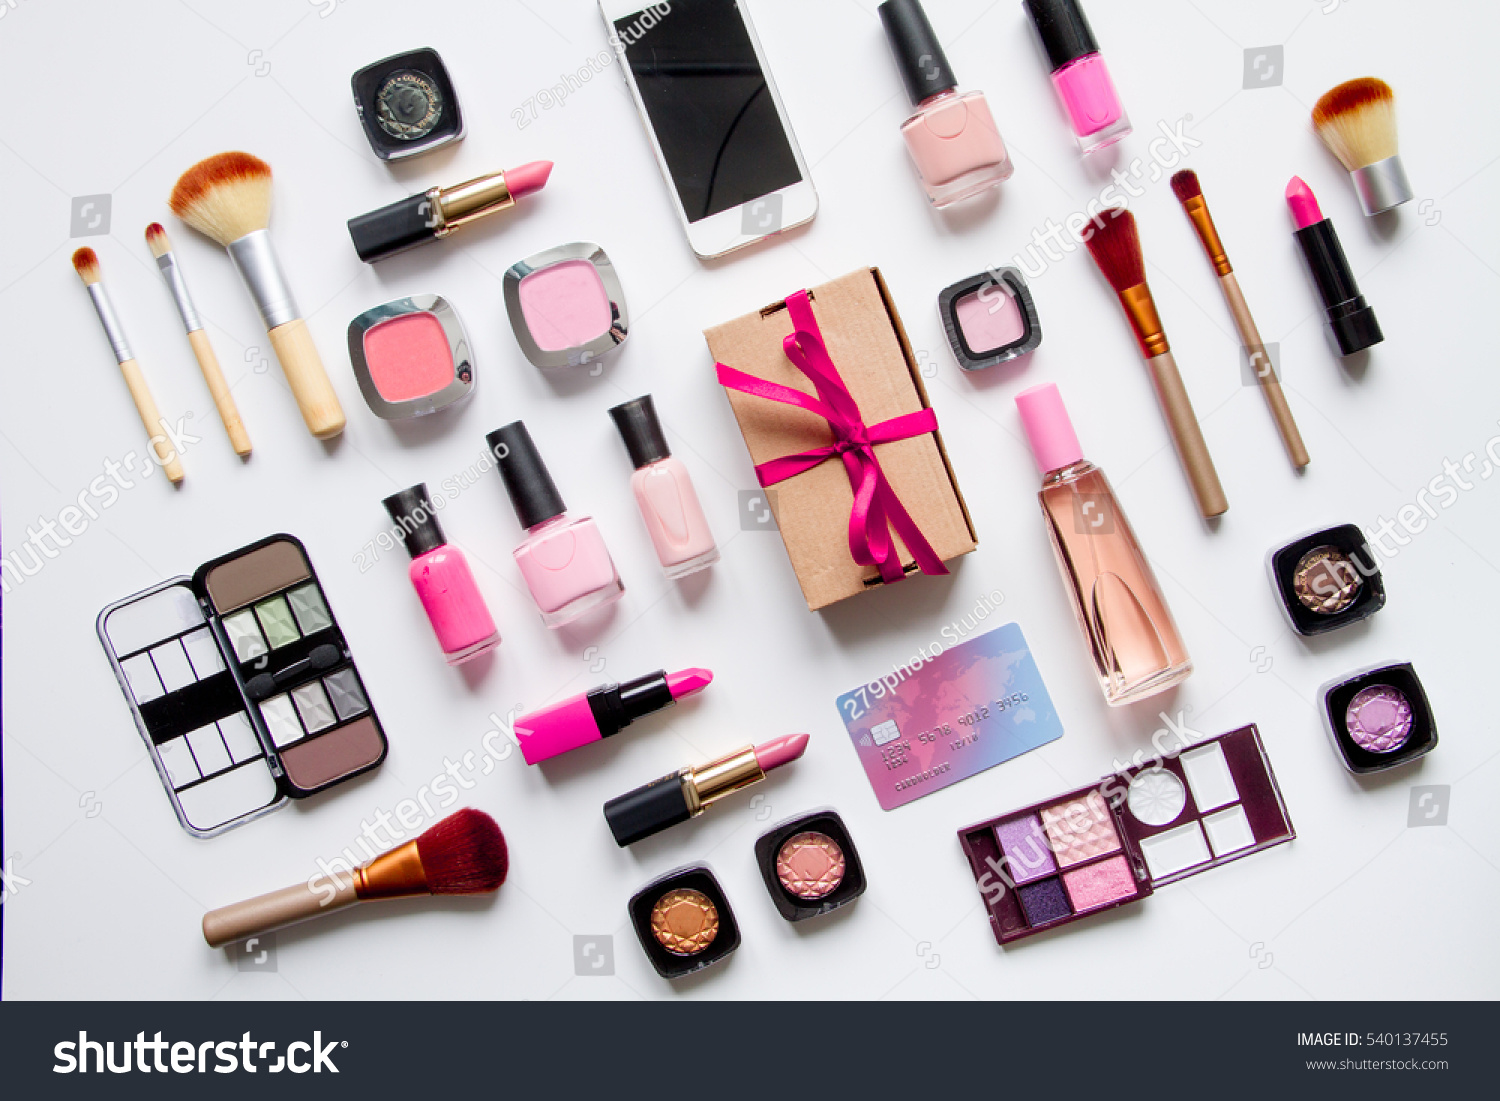 Save Money on Makeup by Shopping Online